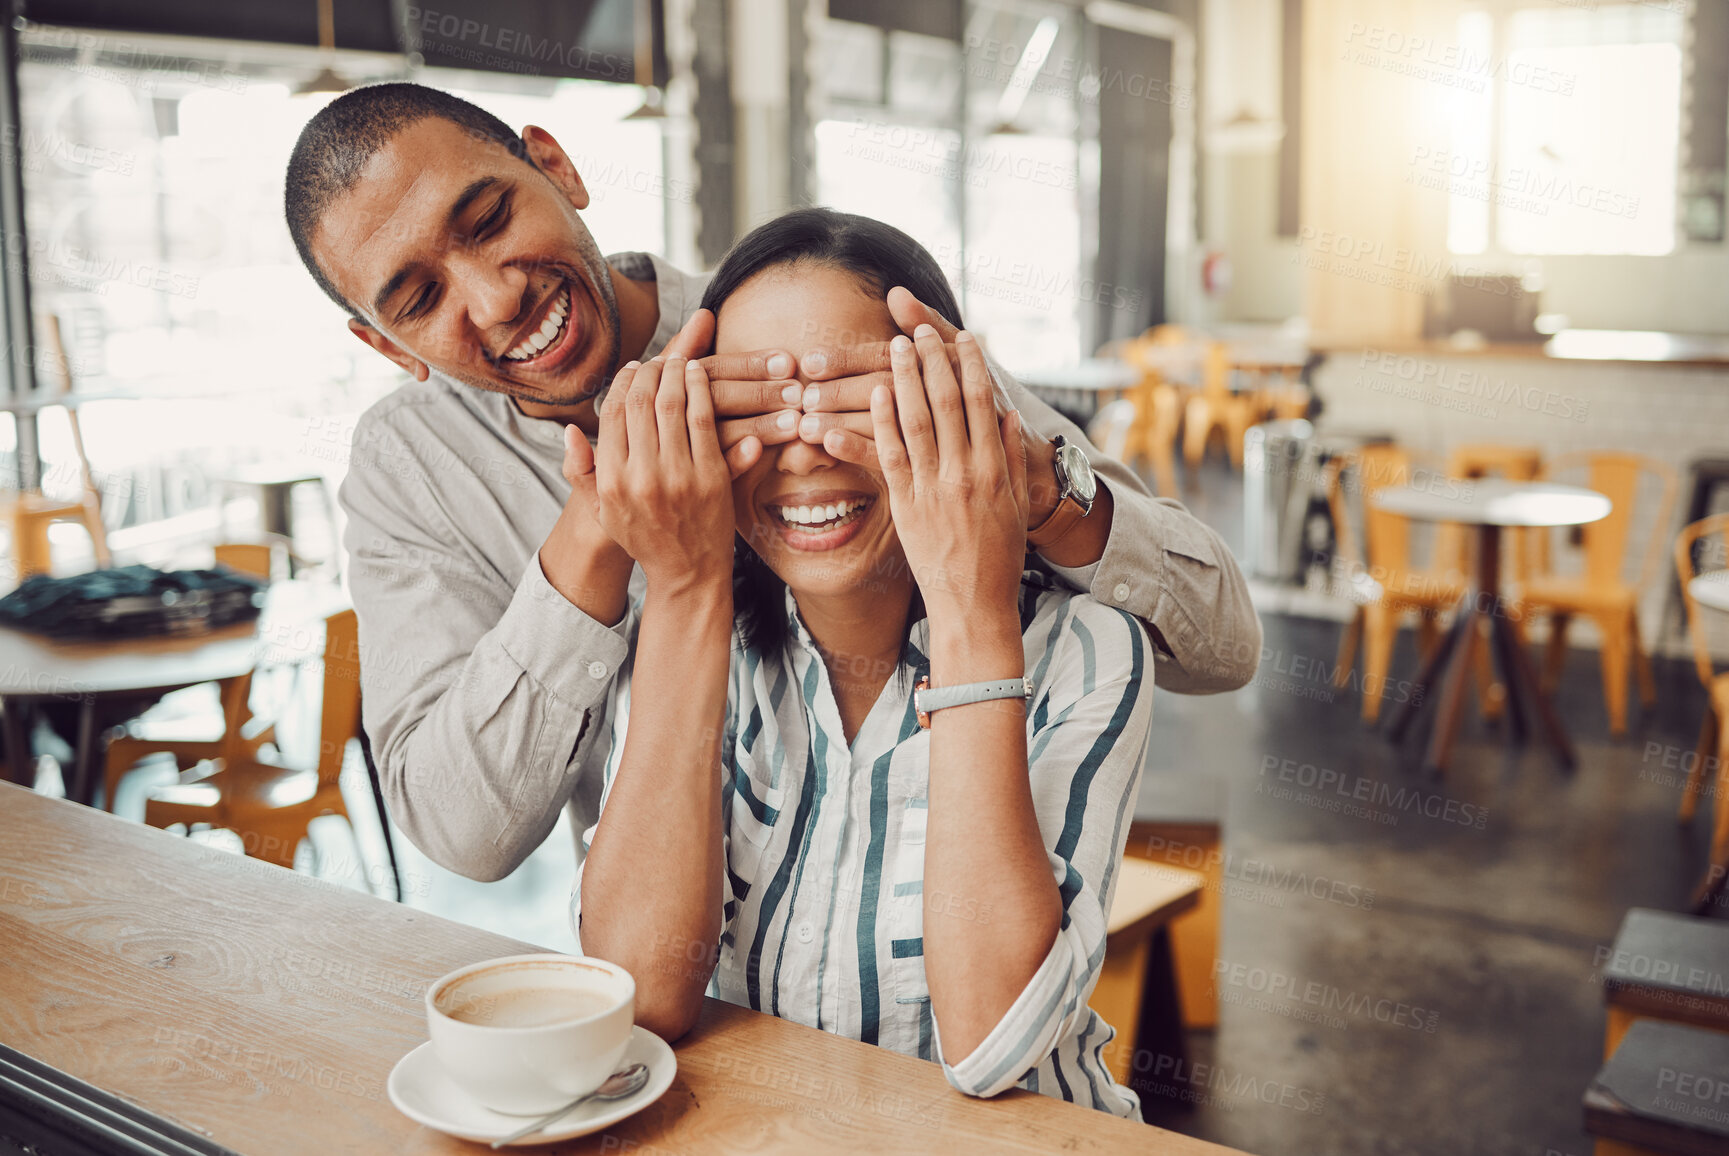 Buy stock photo Cheerful young man covering his girlfriends eyes and surprising her while sitting in a cafe. Happy young mixed race couple meeting for coffee on their first date. Excited woman trying to guess who is behind her